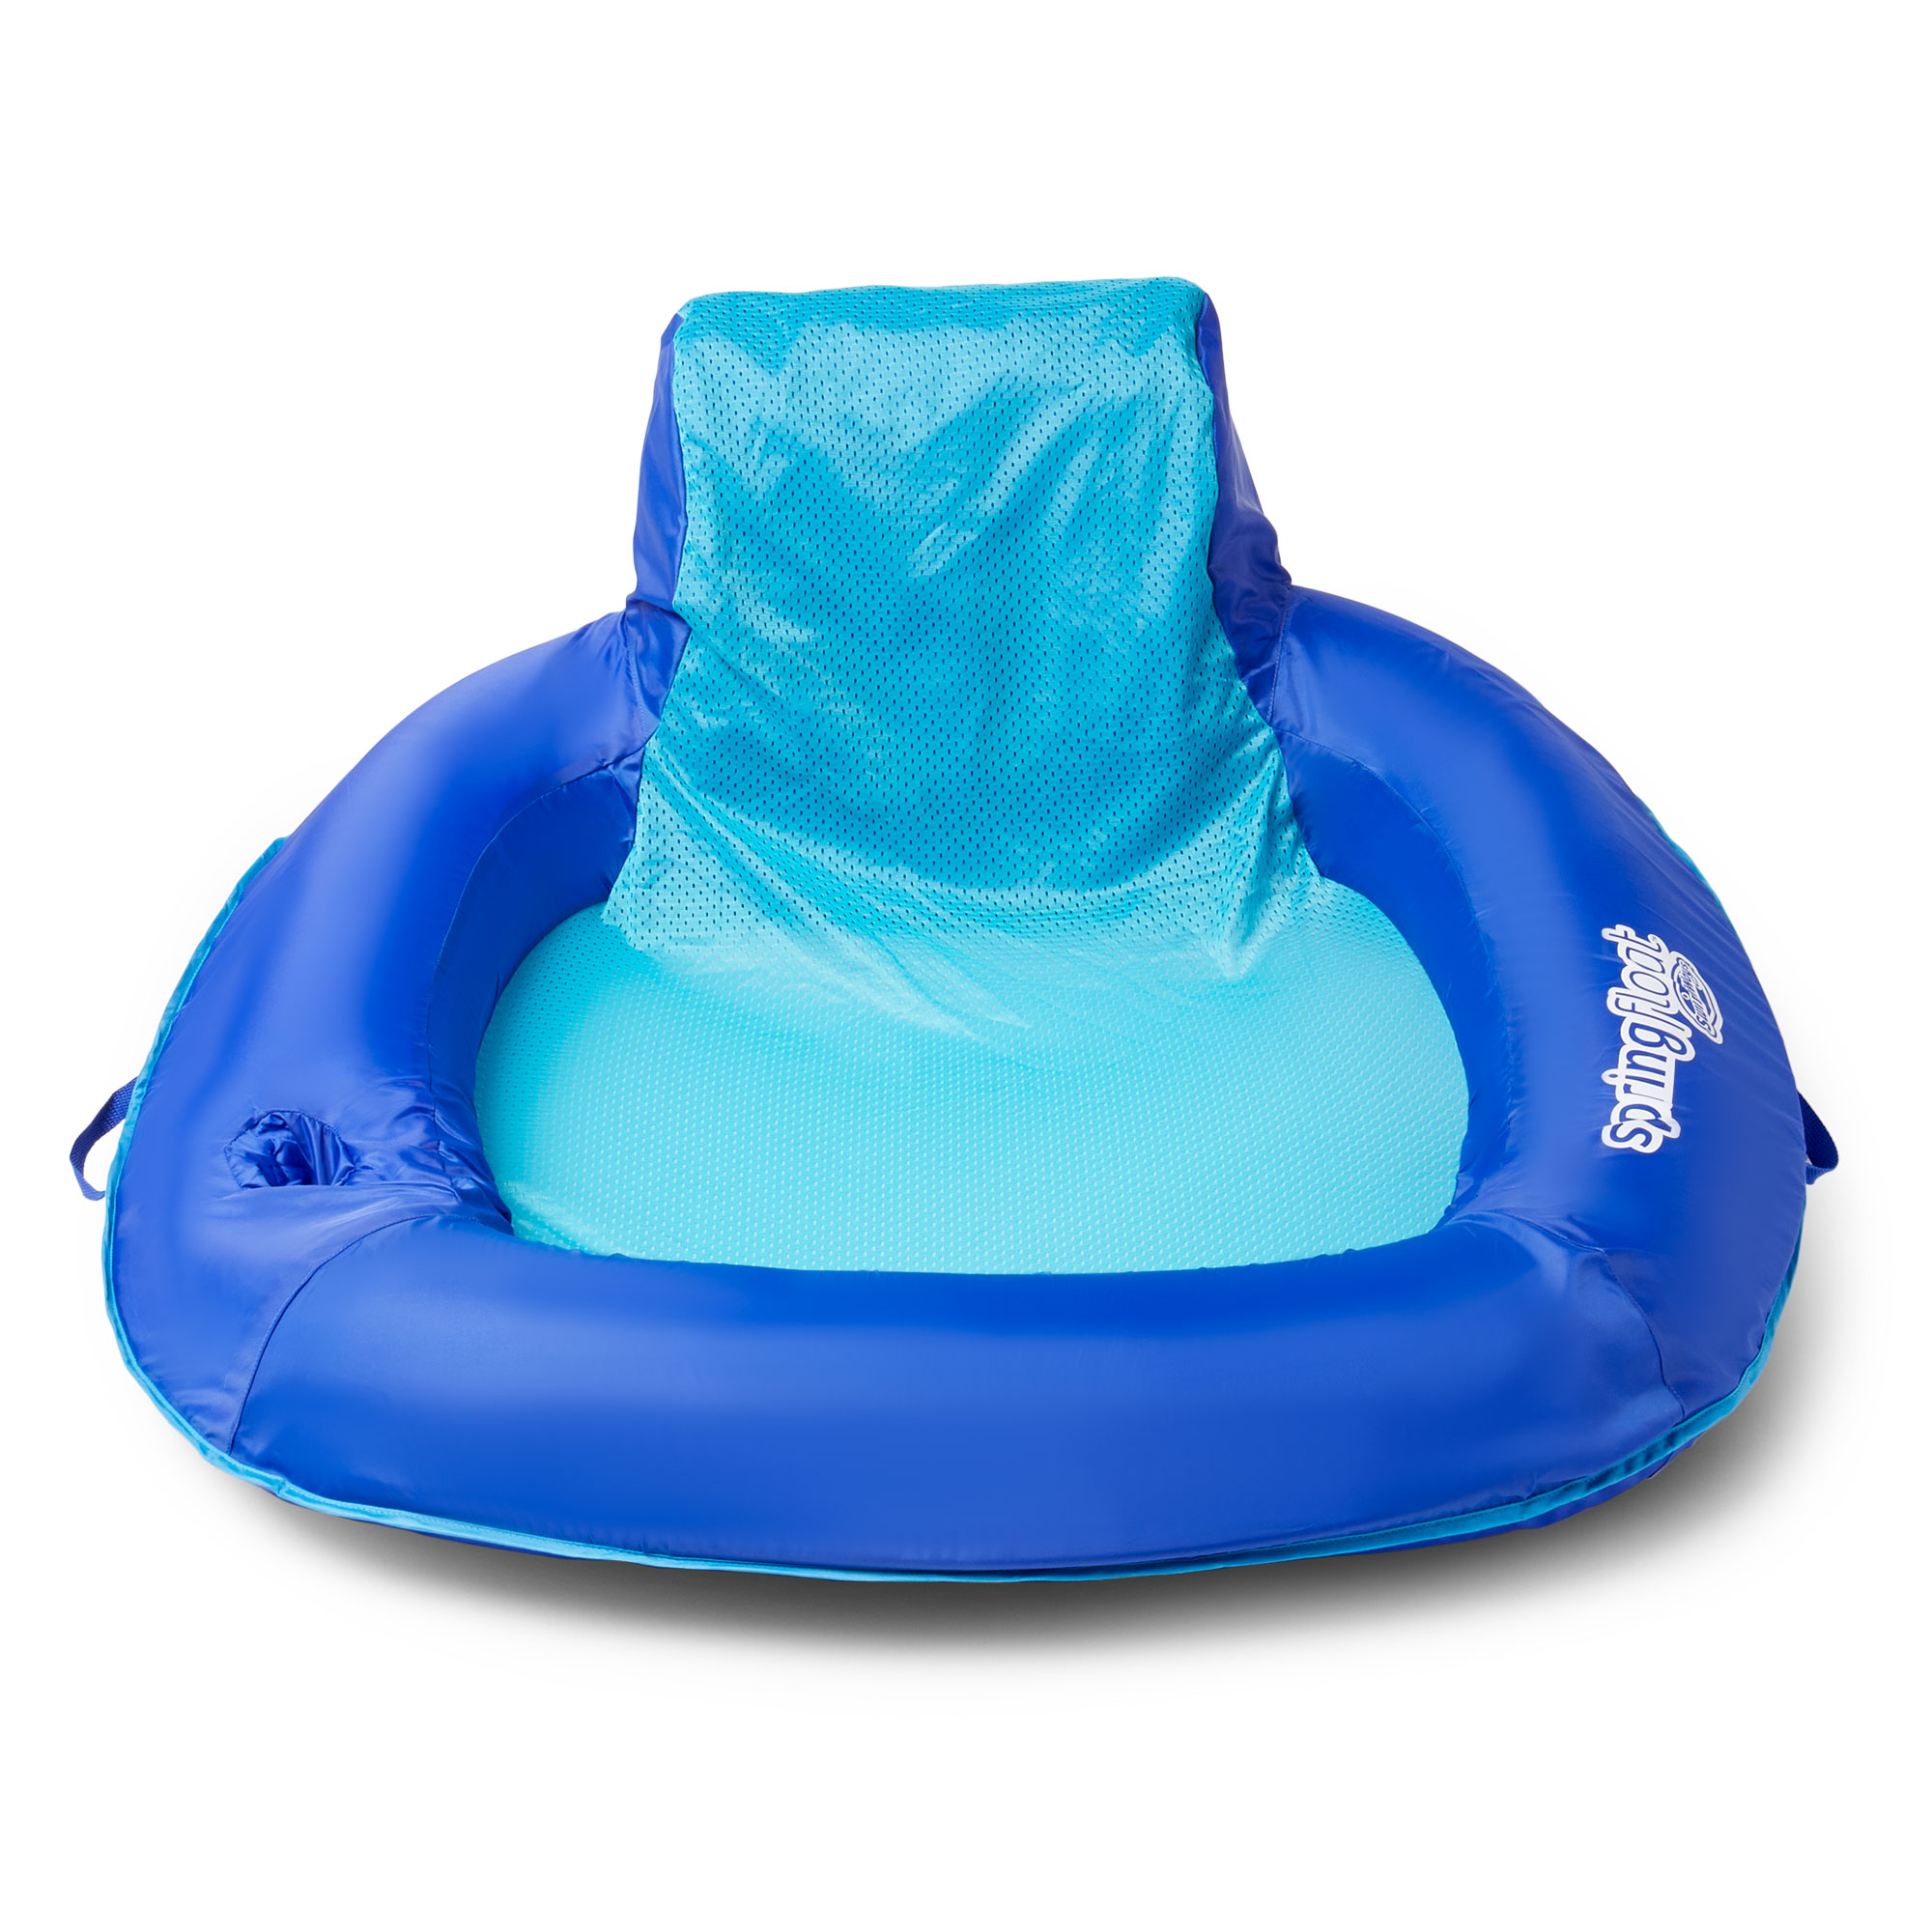 SwimWays SunSeat Floating Inflatable Swimming Pool Lounge Chair w/Armrests, Backrests, and Cup Holder, Dark Blue - image 2 of 8